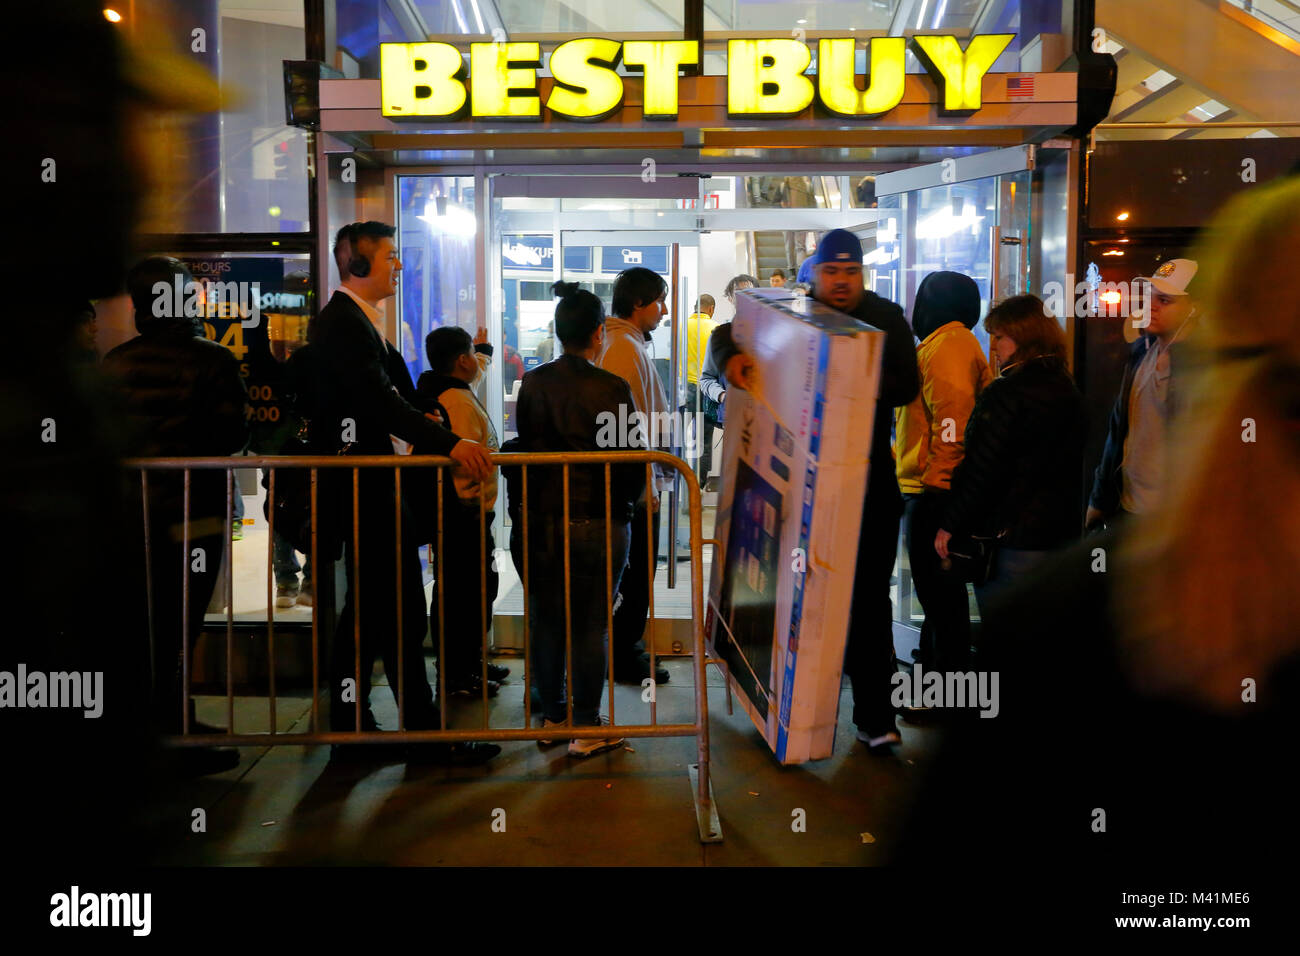 A shopper walks out of a Best Buy with a large screen TV during Black Friday shopping event in New York City. Stock Photo